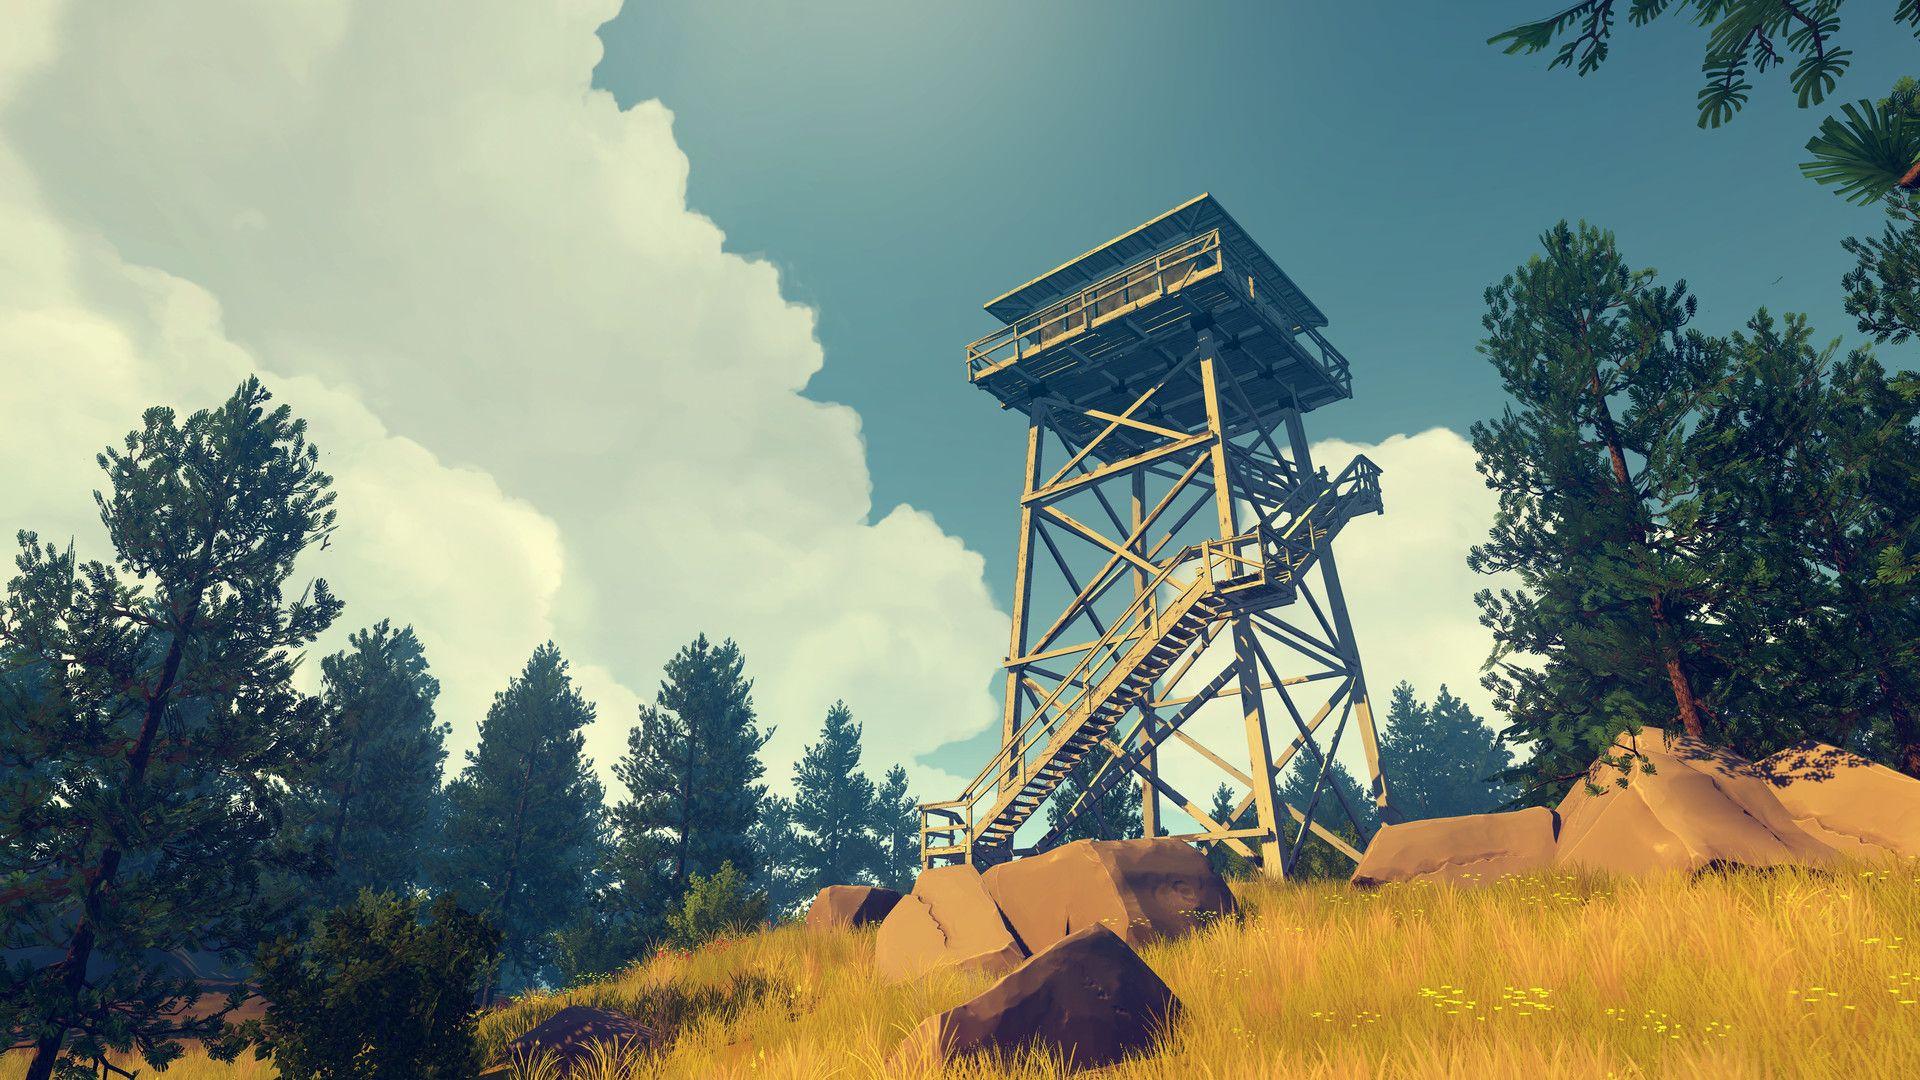 Firewatch developer Campo Santo has been acquired